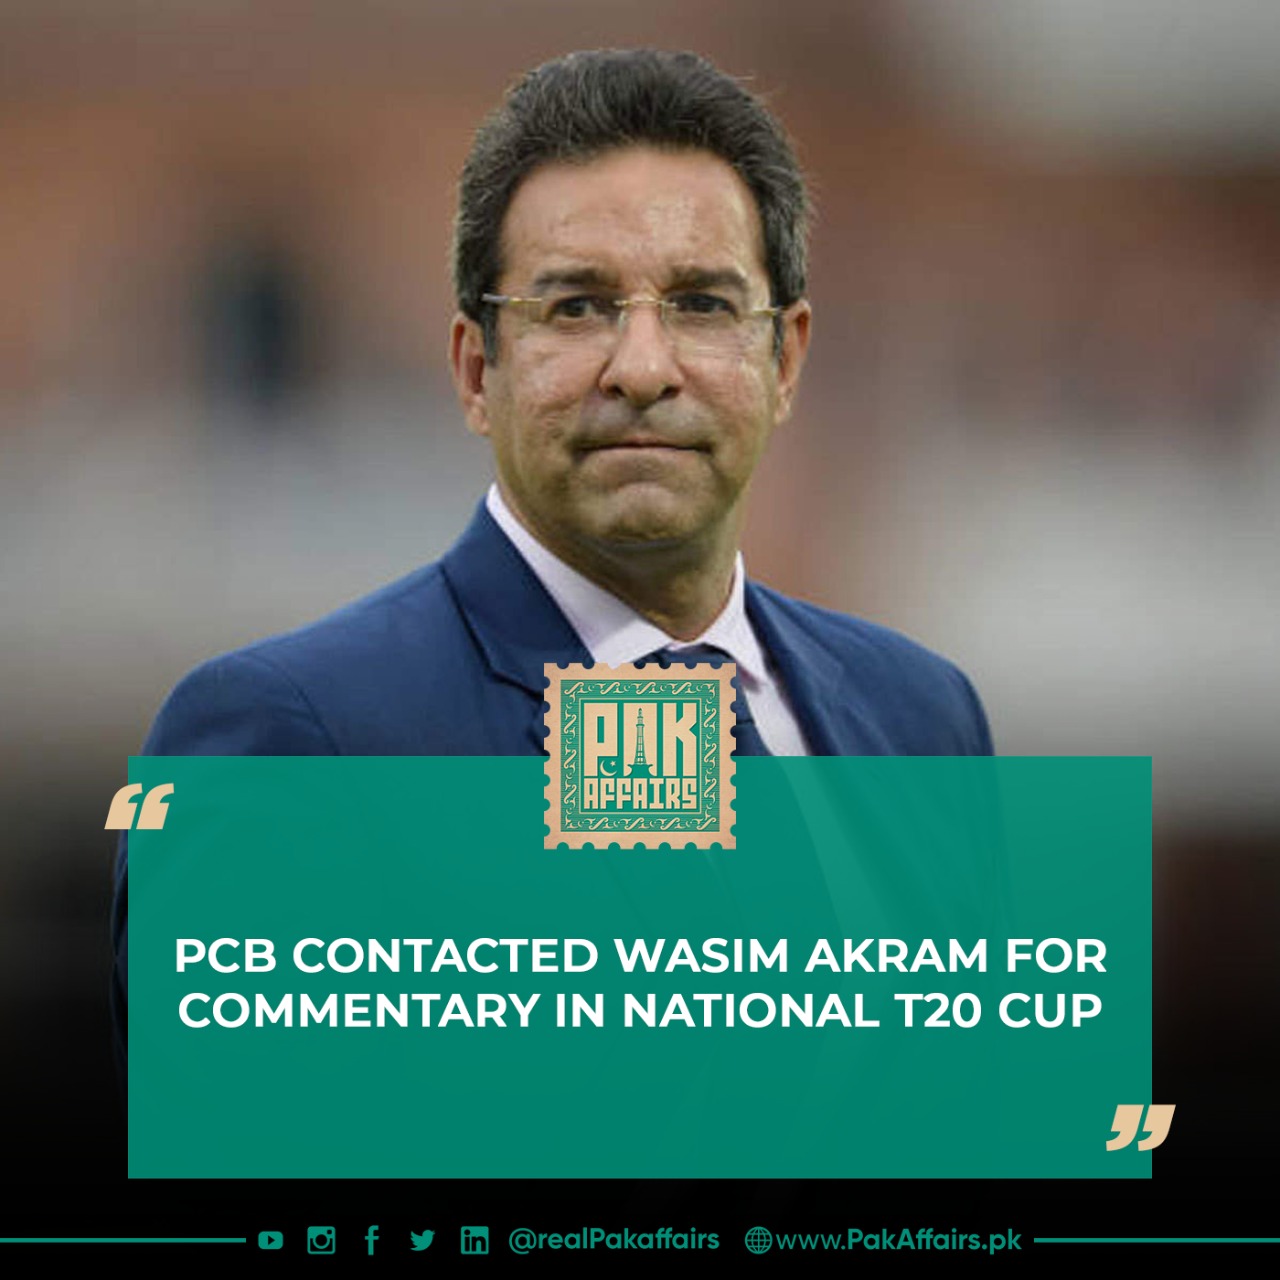 PCB Contacted Wasim Akram for commentary in National T20 Cup